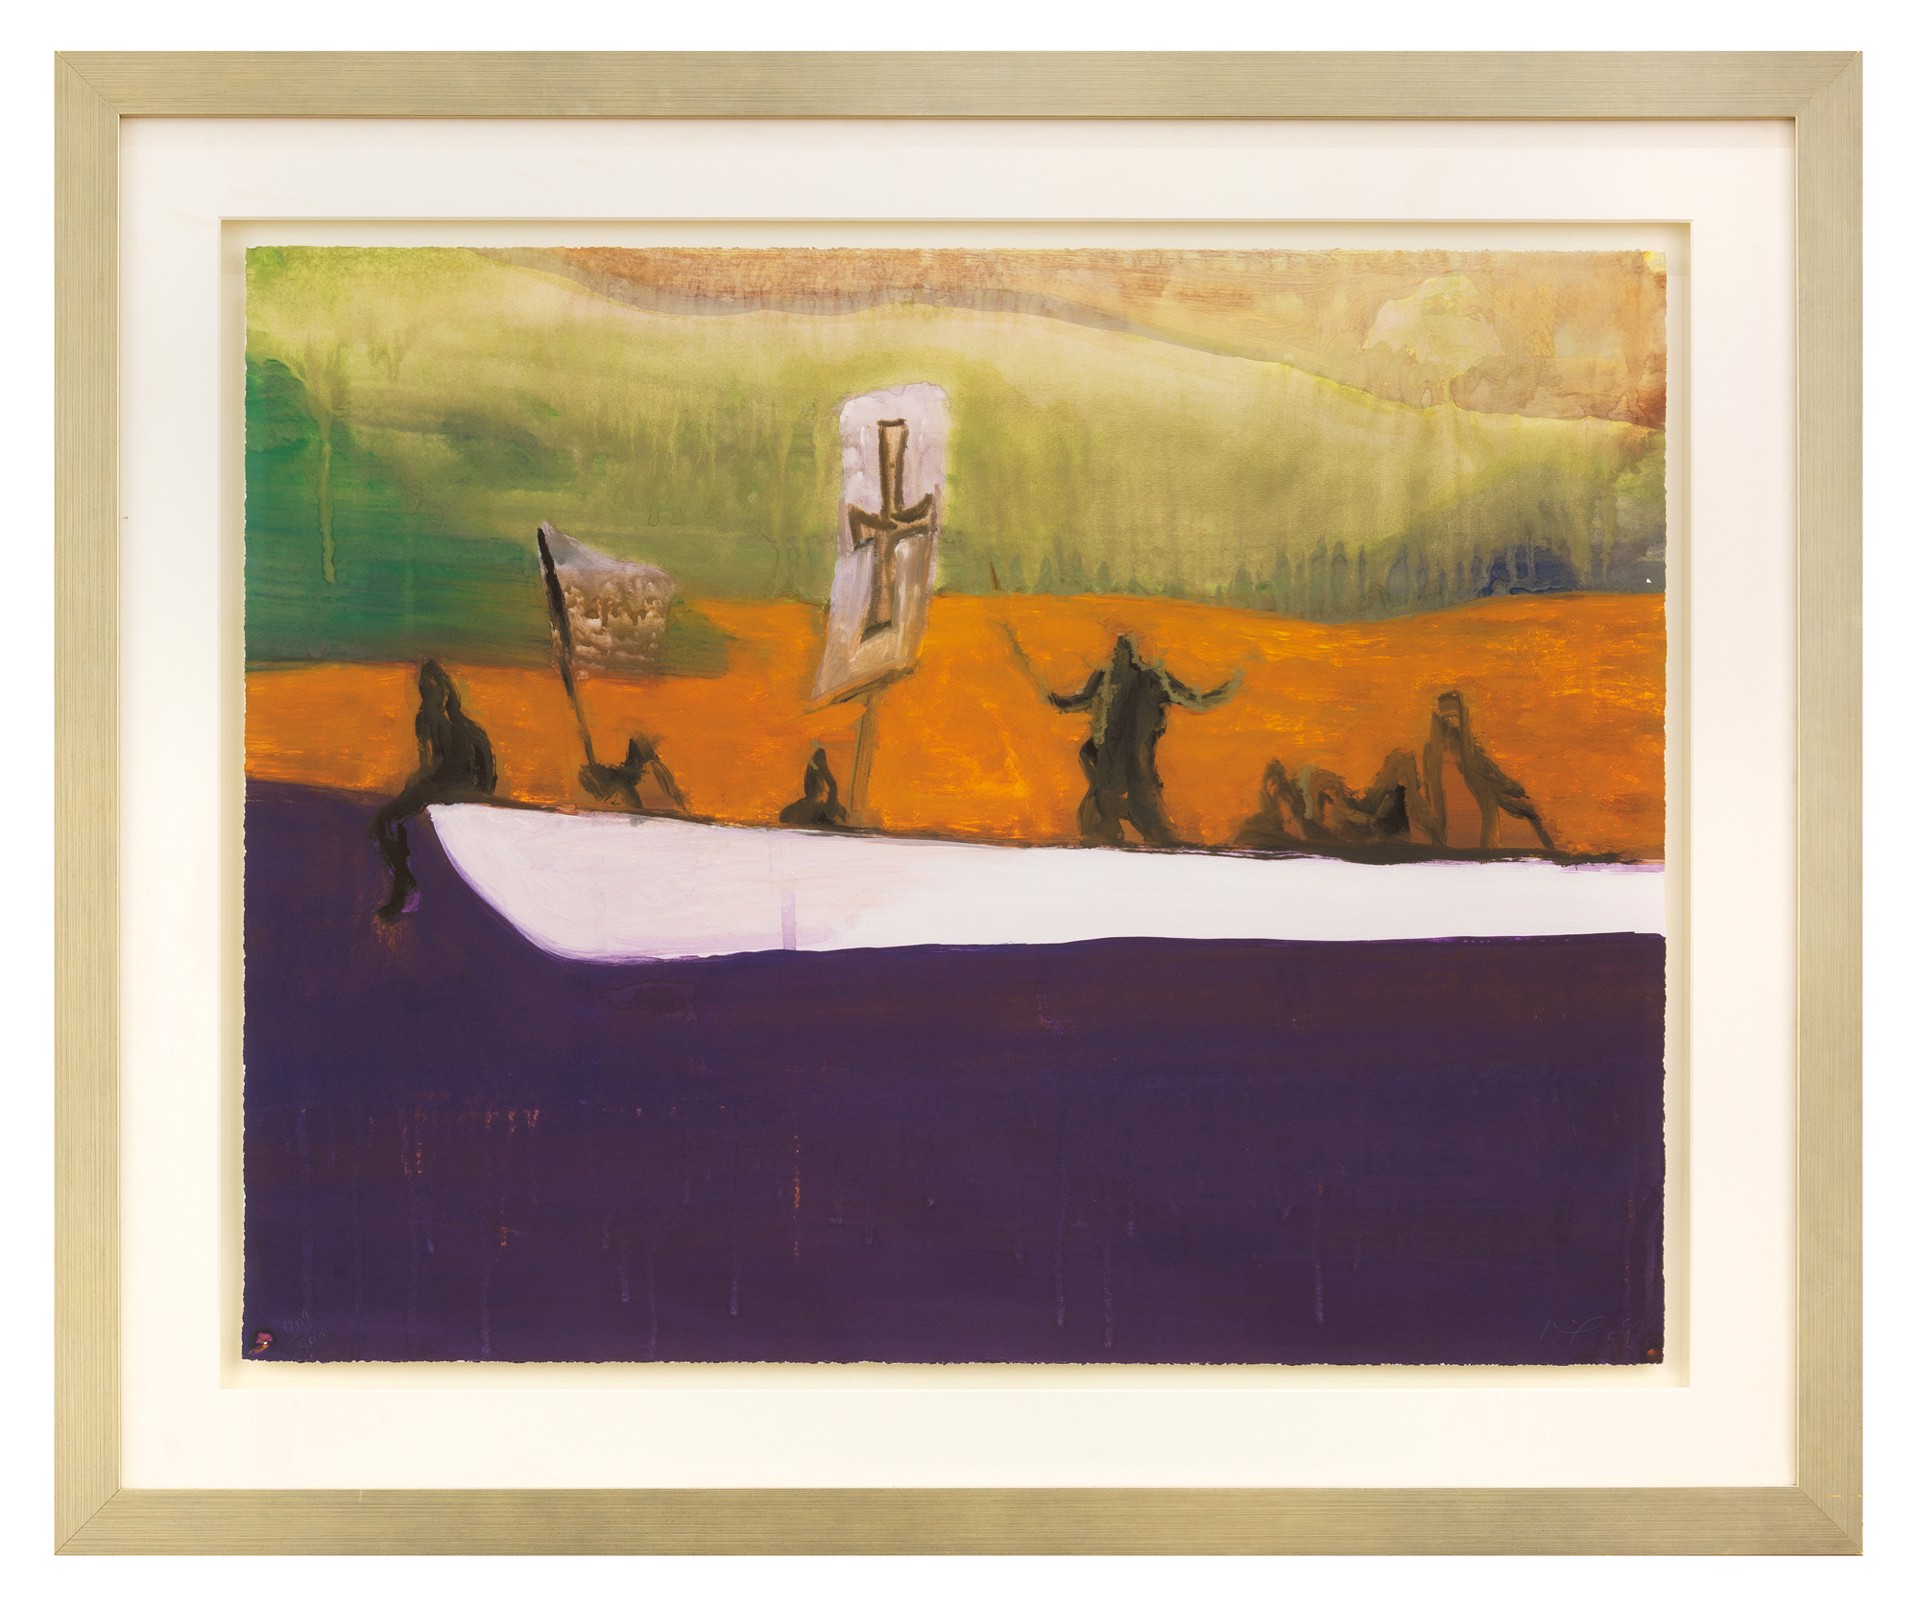 Untitled (Canoe) by Peter Doig